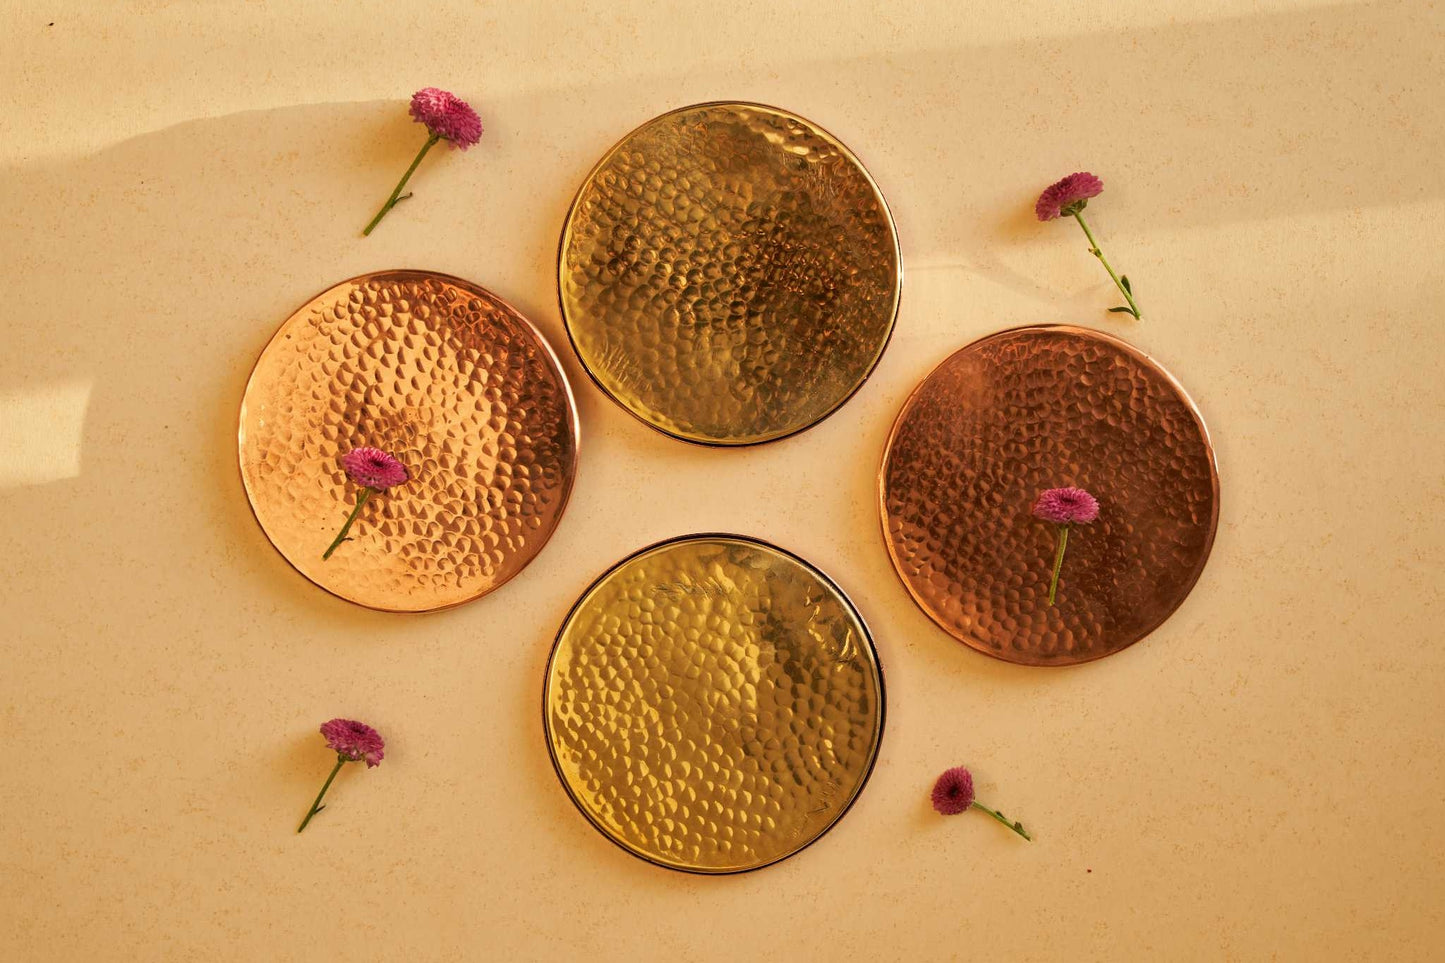 'Chamak' Copper and Brass Coasters (Set of 4)